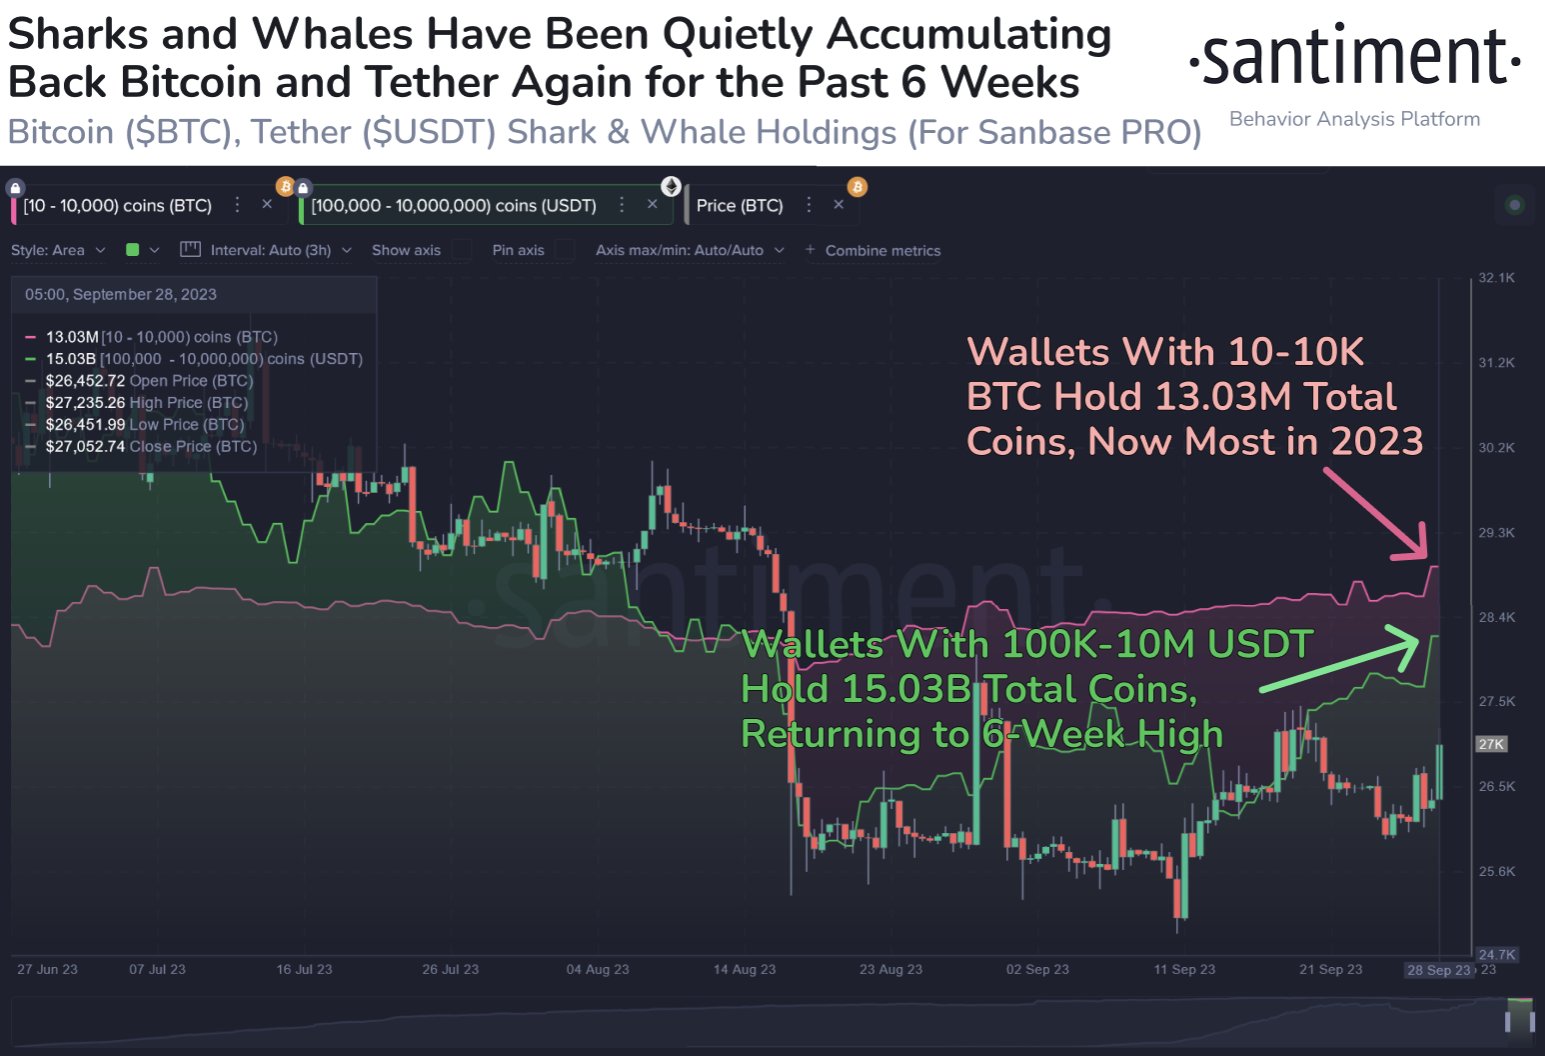 Bitcoin & Tether Sharks & Whales